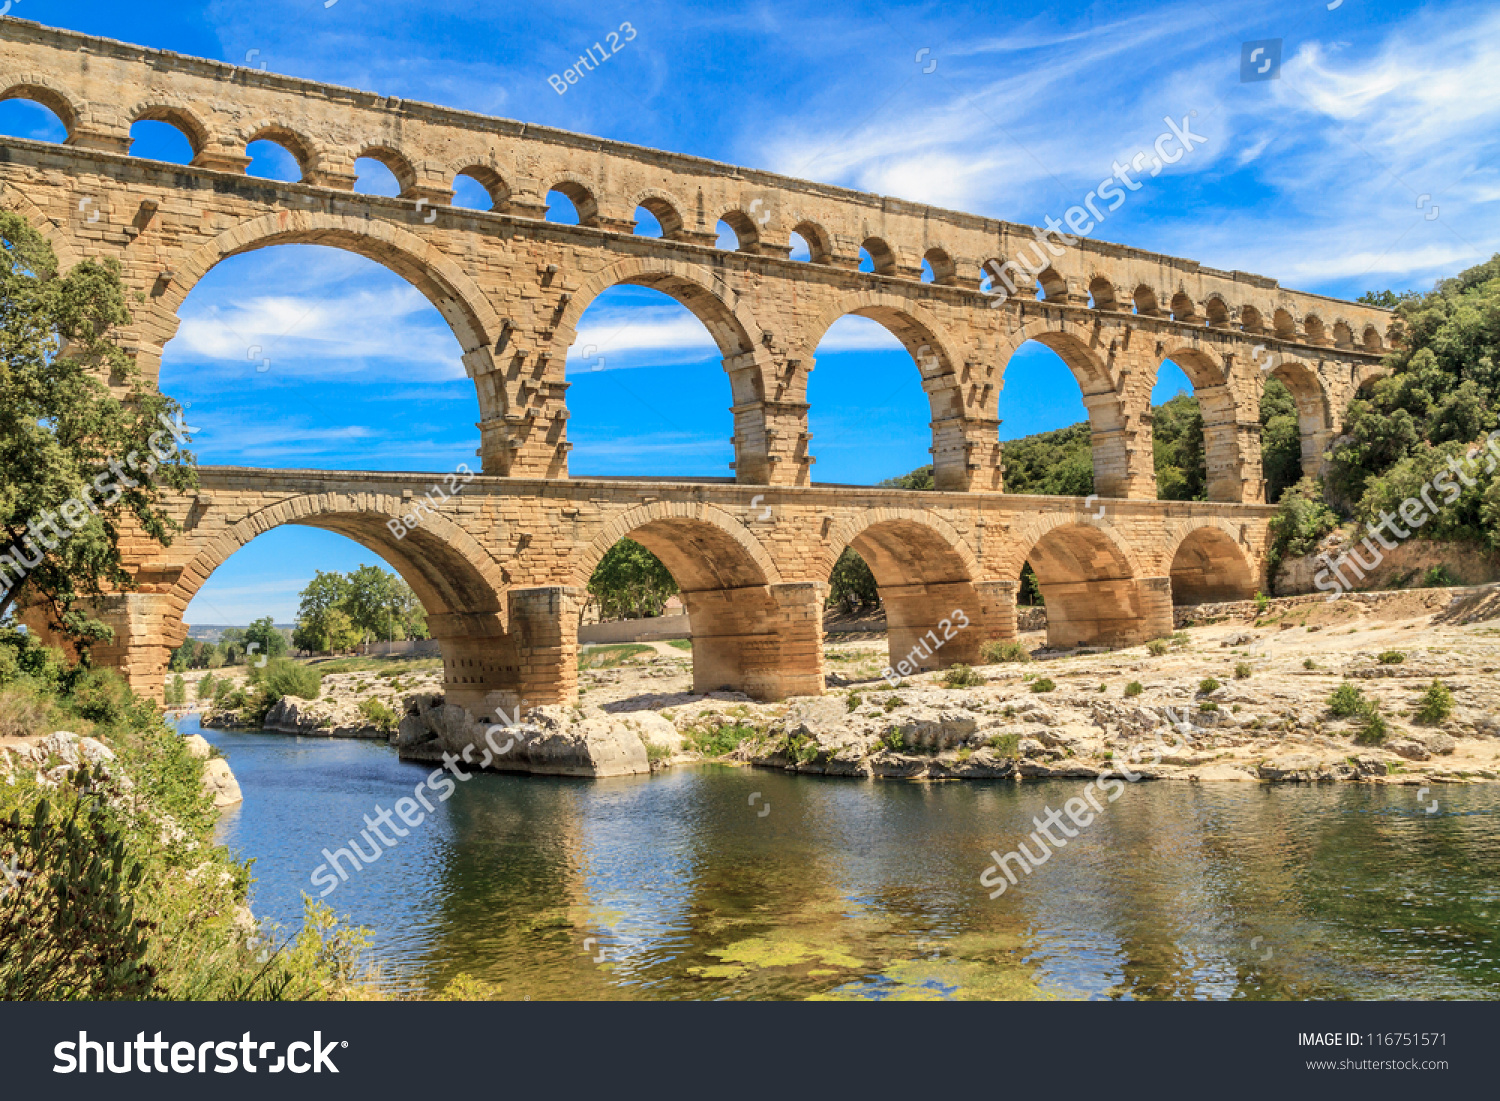 How Old Is The Aqueduct At Nimes 94